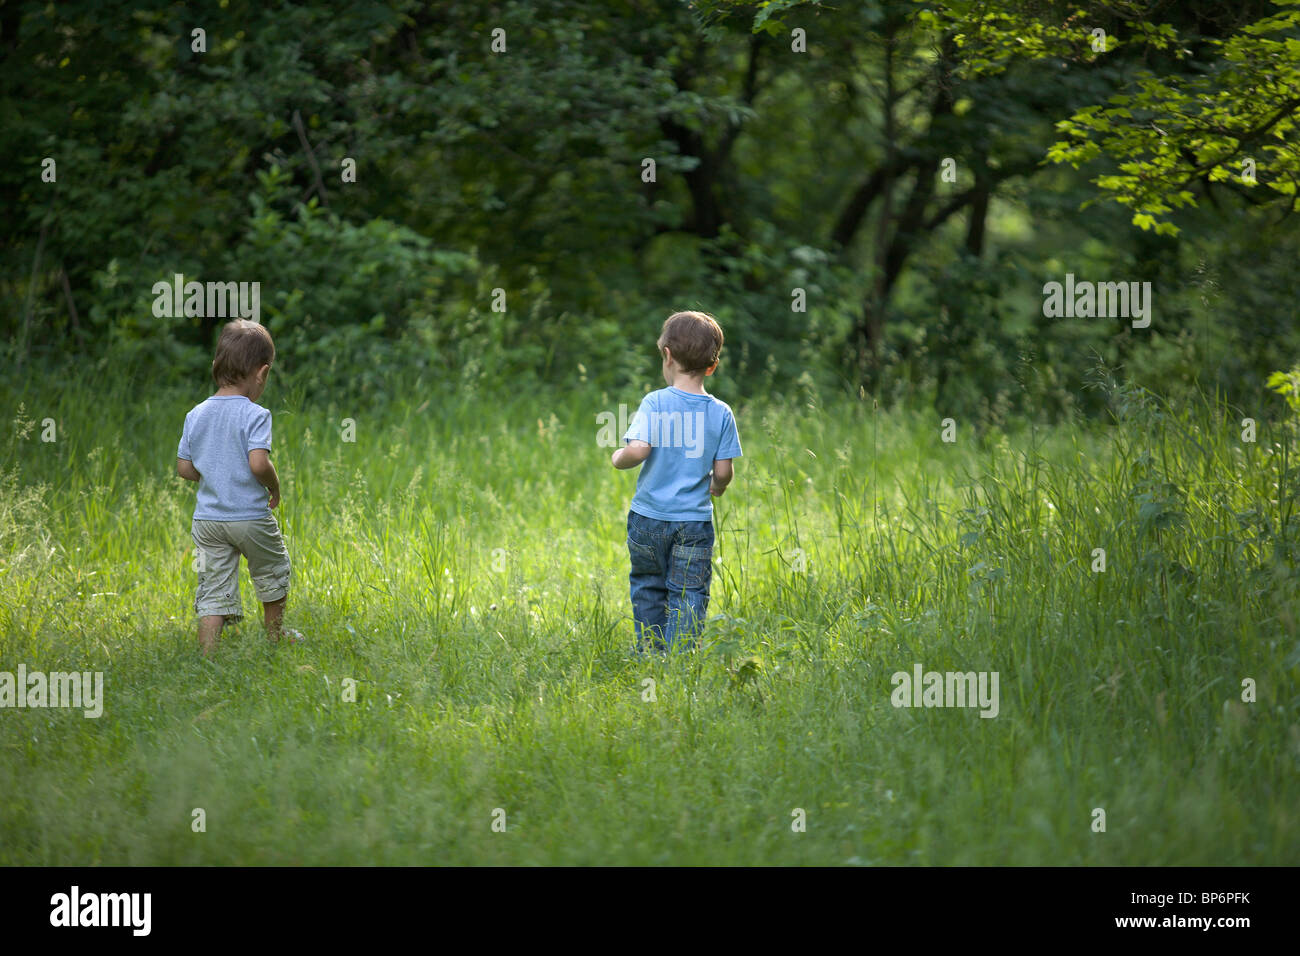 Two young boys walking outdoors in summer Stock Photo